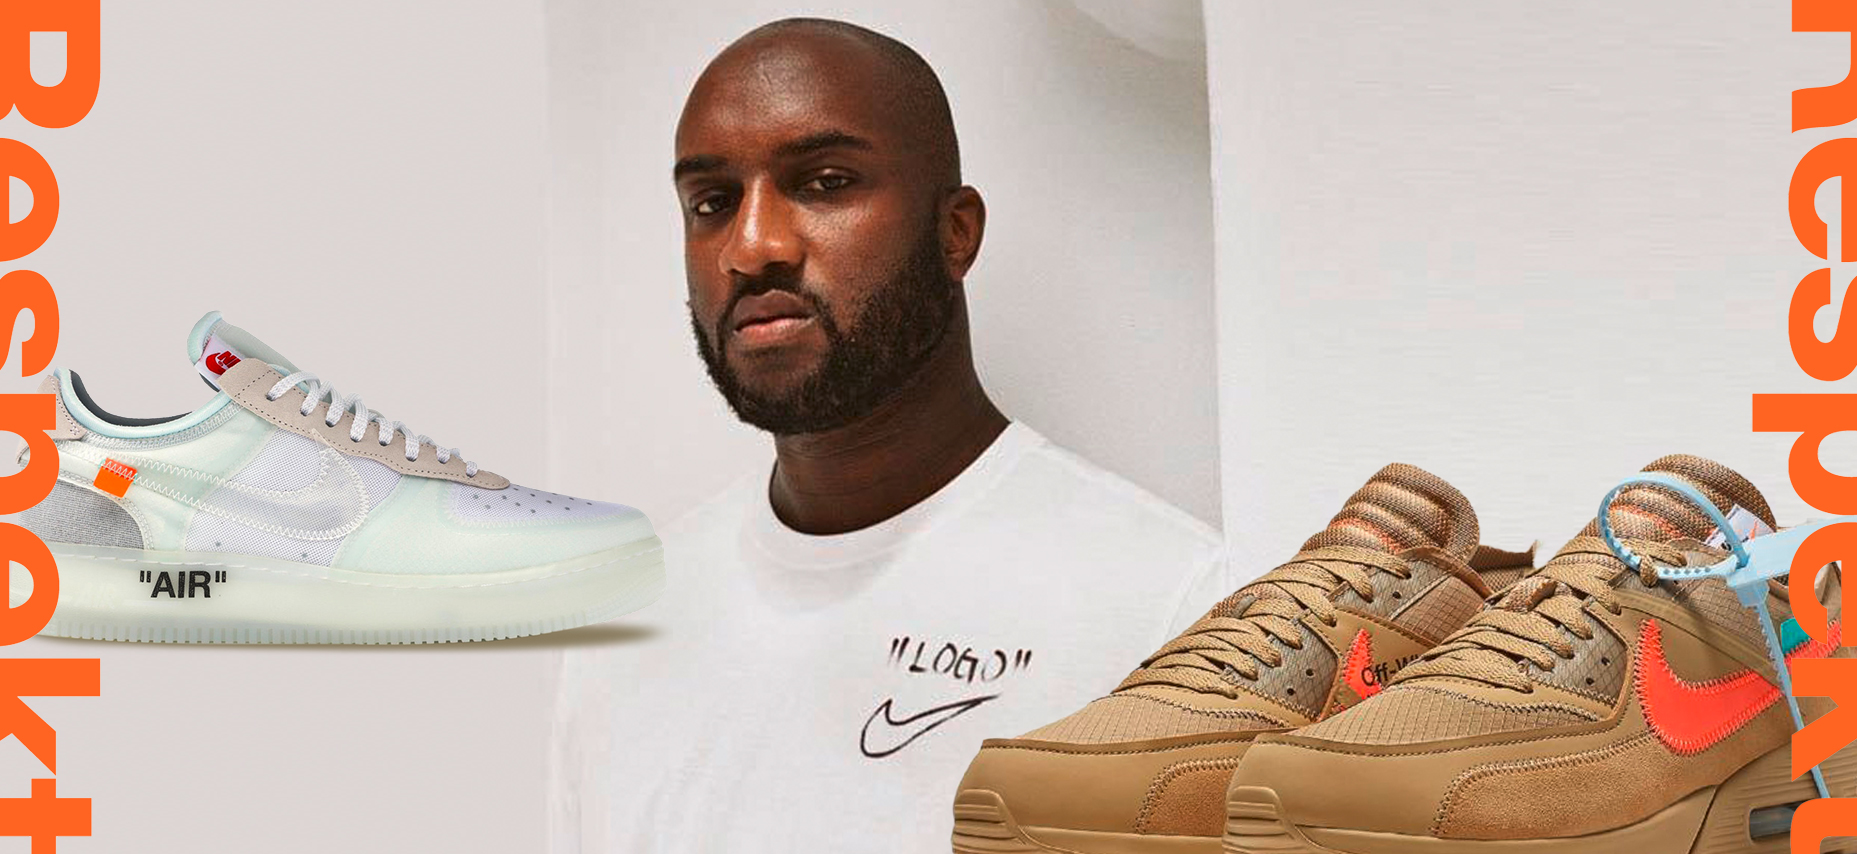 Virgil Abloh's approach to his “The 10” collection with Nike was